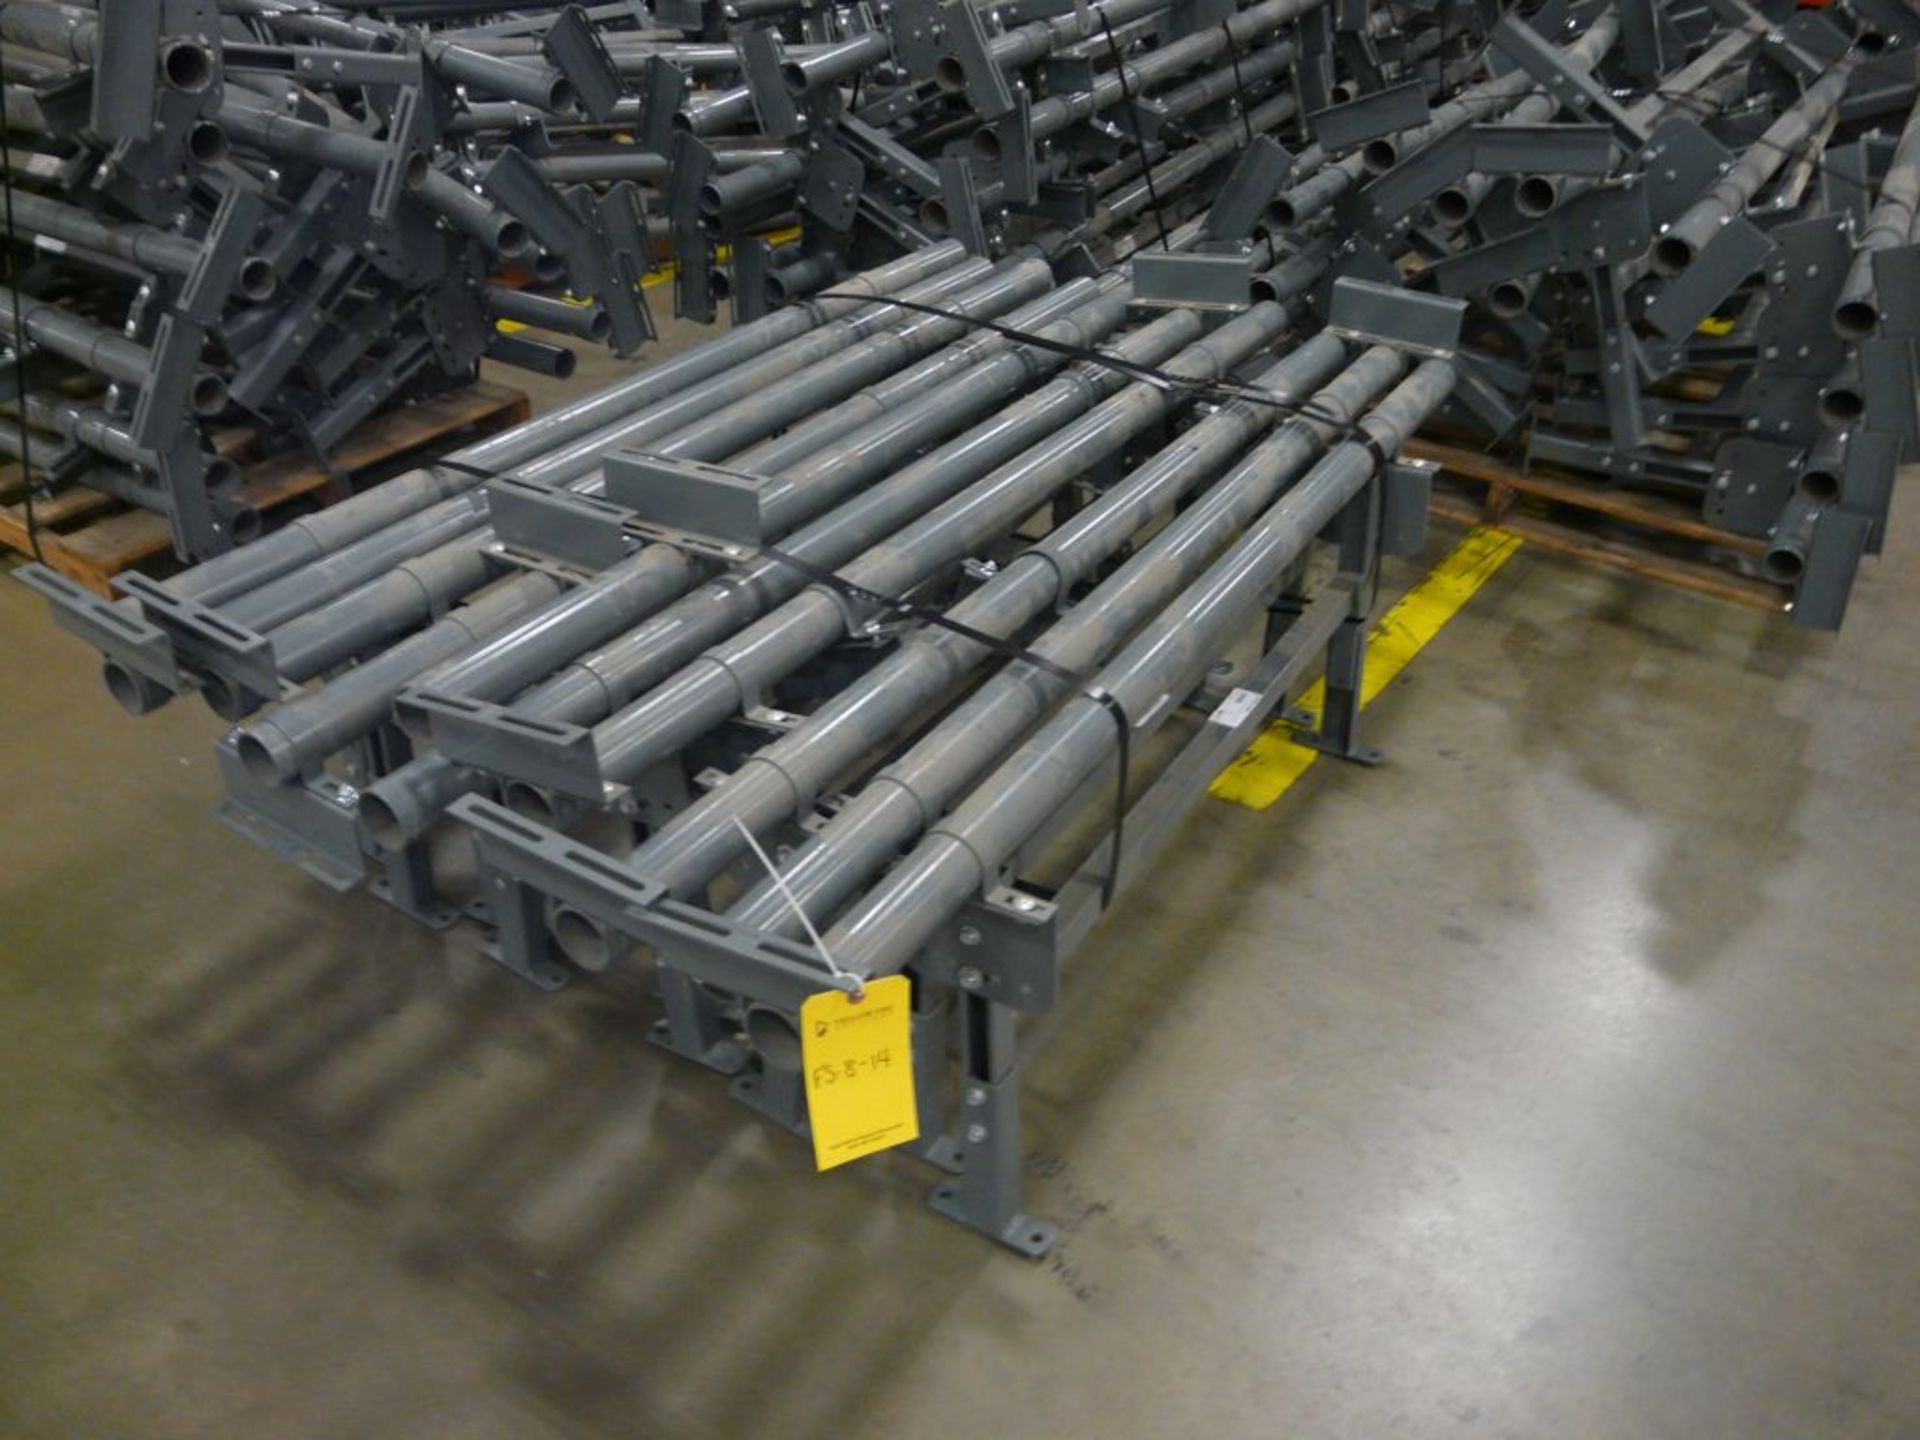 Lot of (10) USA Floor Supports - Brace: 71"L; Stand: 44"L x 19"H; Tag: 223864 - $30 Lot Loading Fee - Image 2 of 4